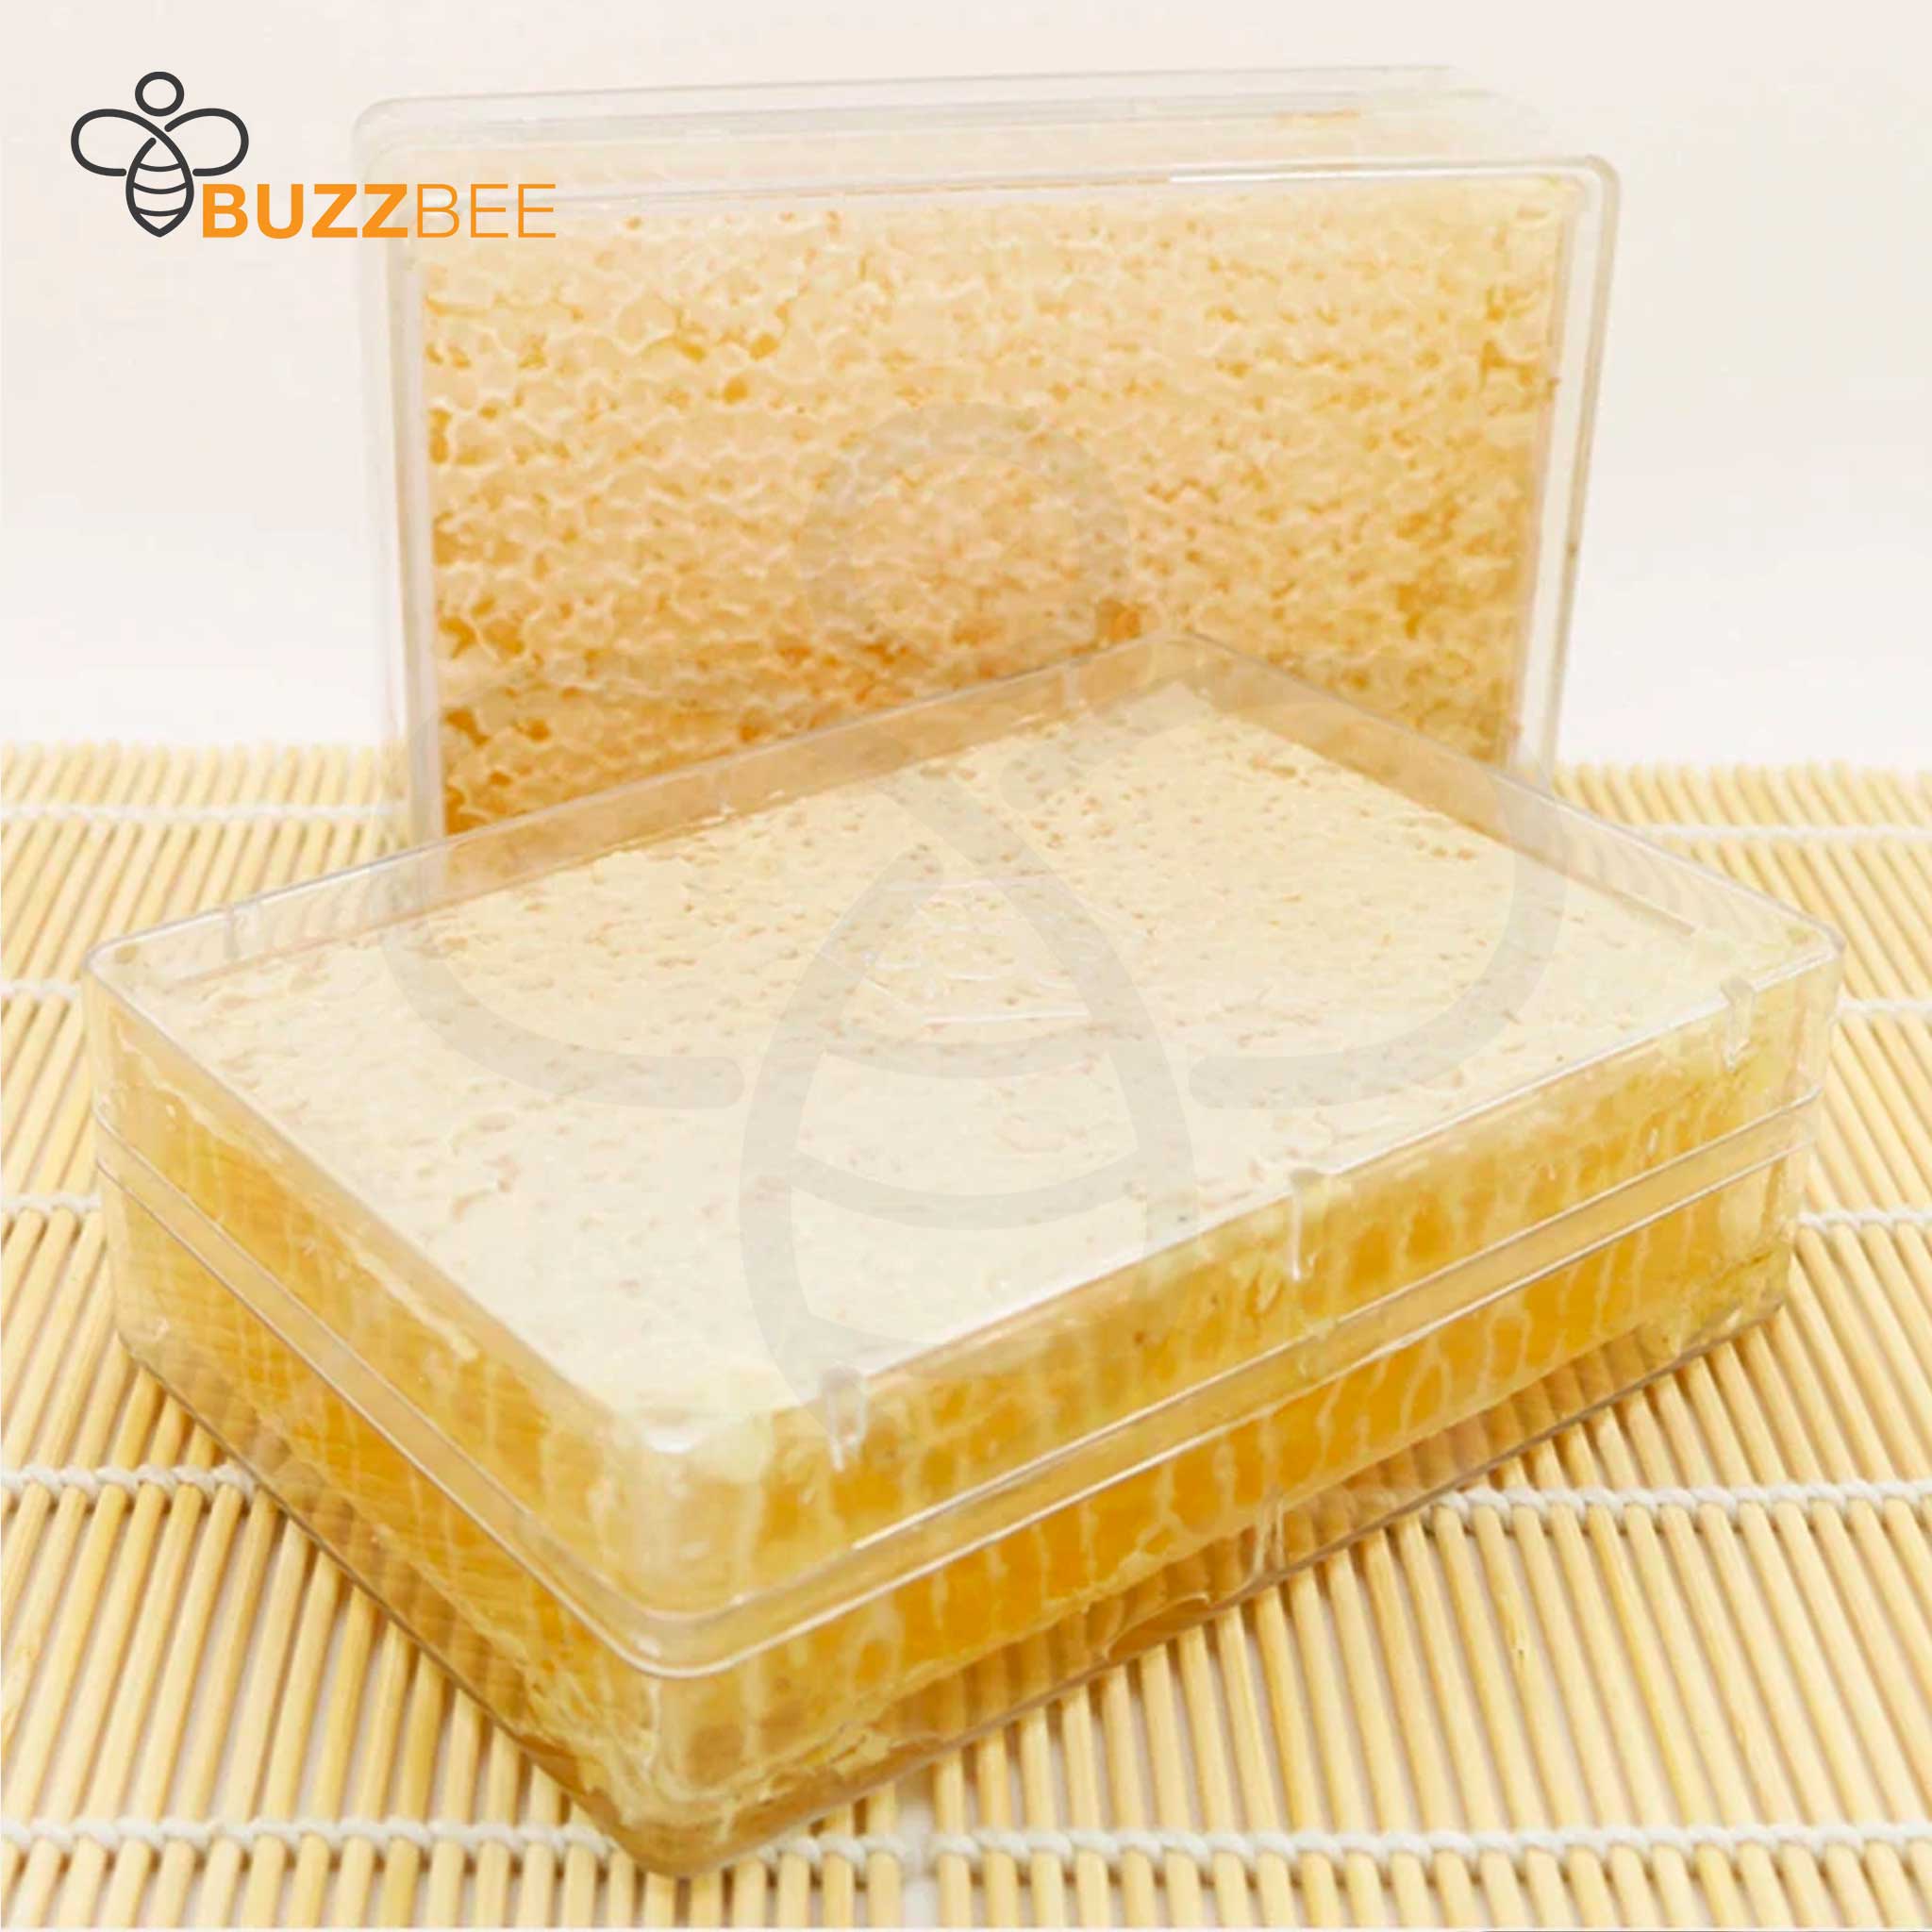 Containers Cassettes for Honey Comb - Processing collection by Buzzbee Beekeeping Supplies